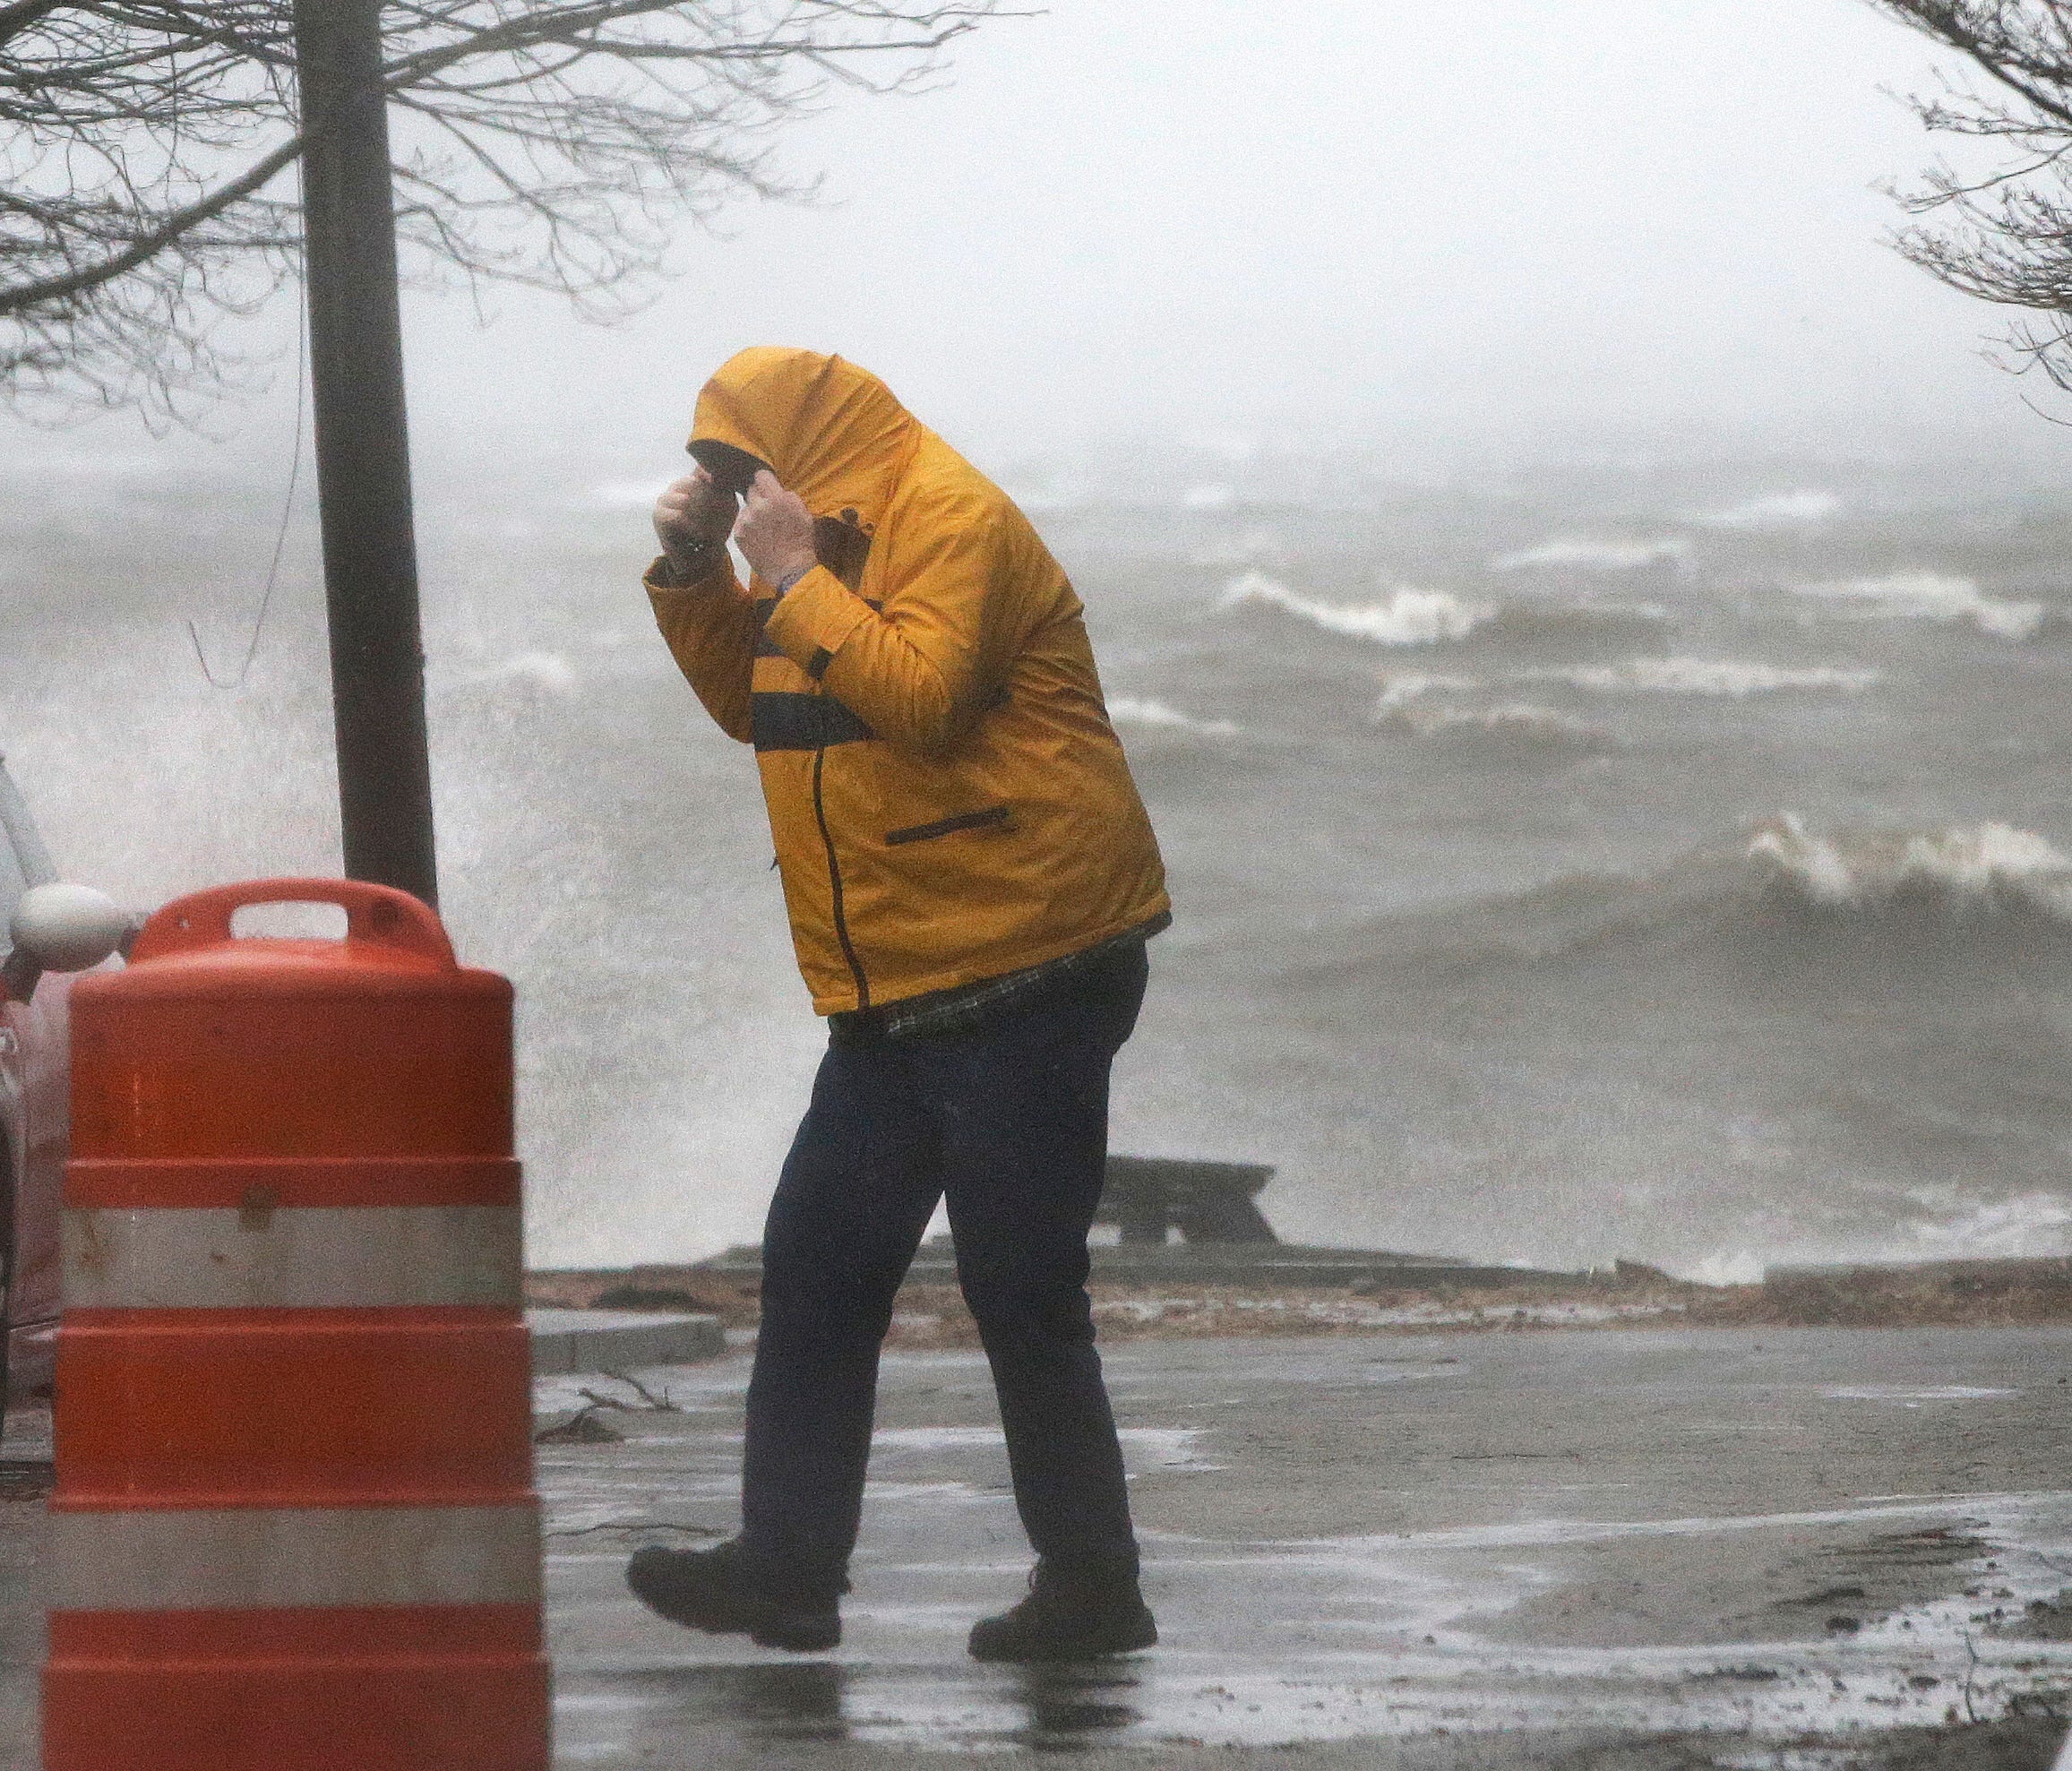 A pedestrian walks near the coastline in Newburyport, Mass. as a major nor'easter pounds the East Coast, packing heavy rain, intermittent snow and strong winds.